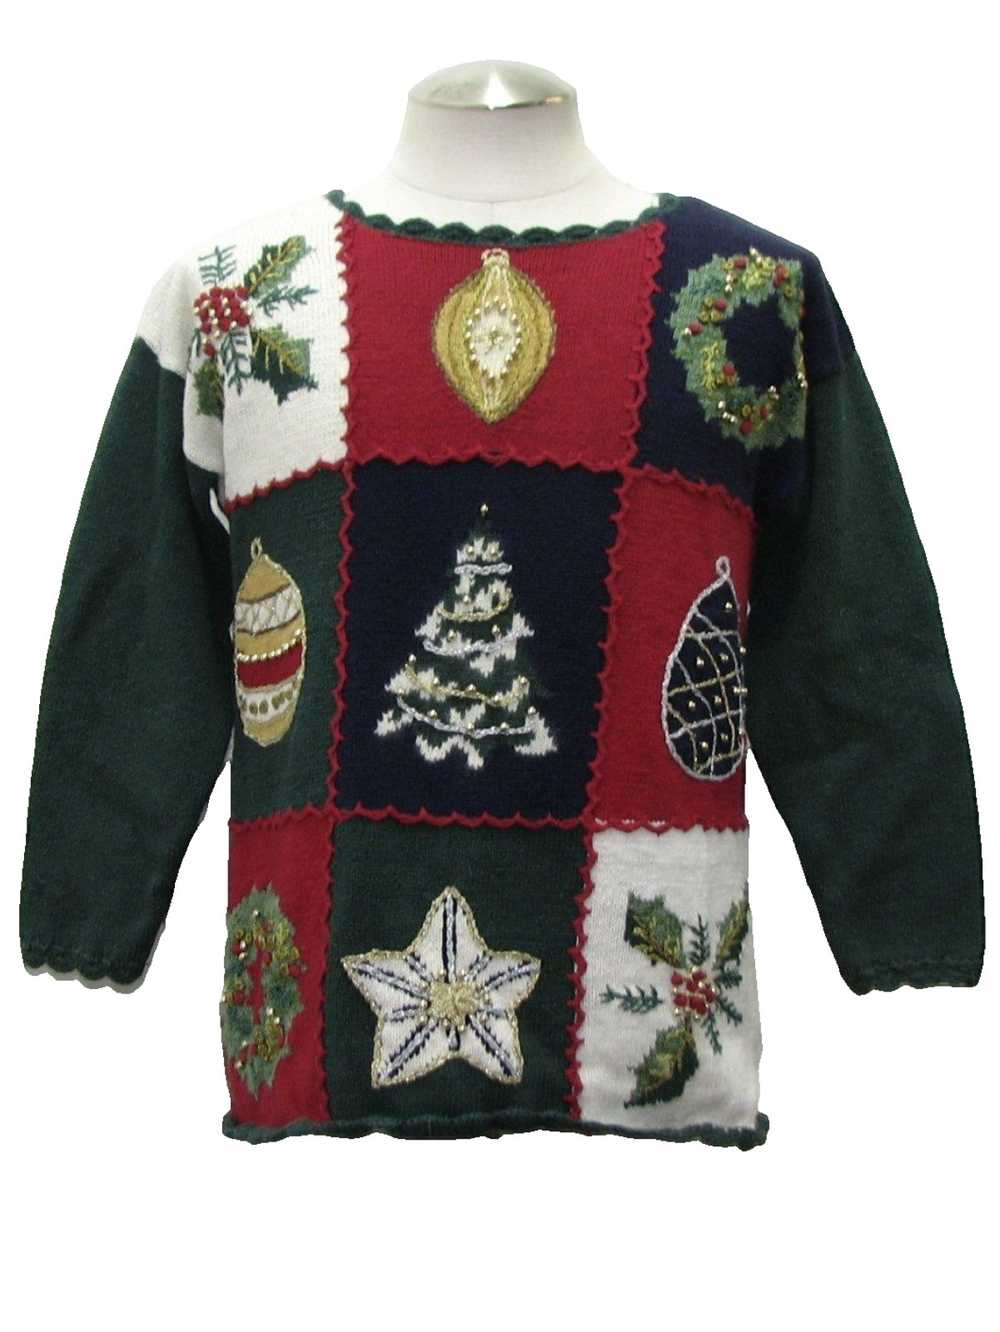 Carly St. Claire Unisex Ugly Christmas Sweater - image 1